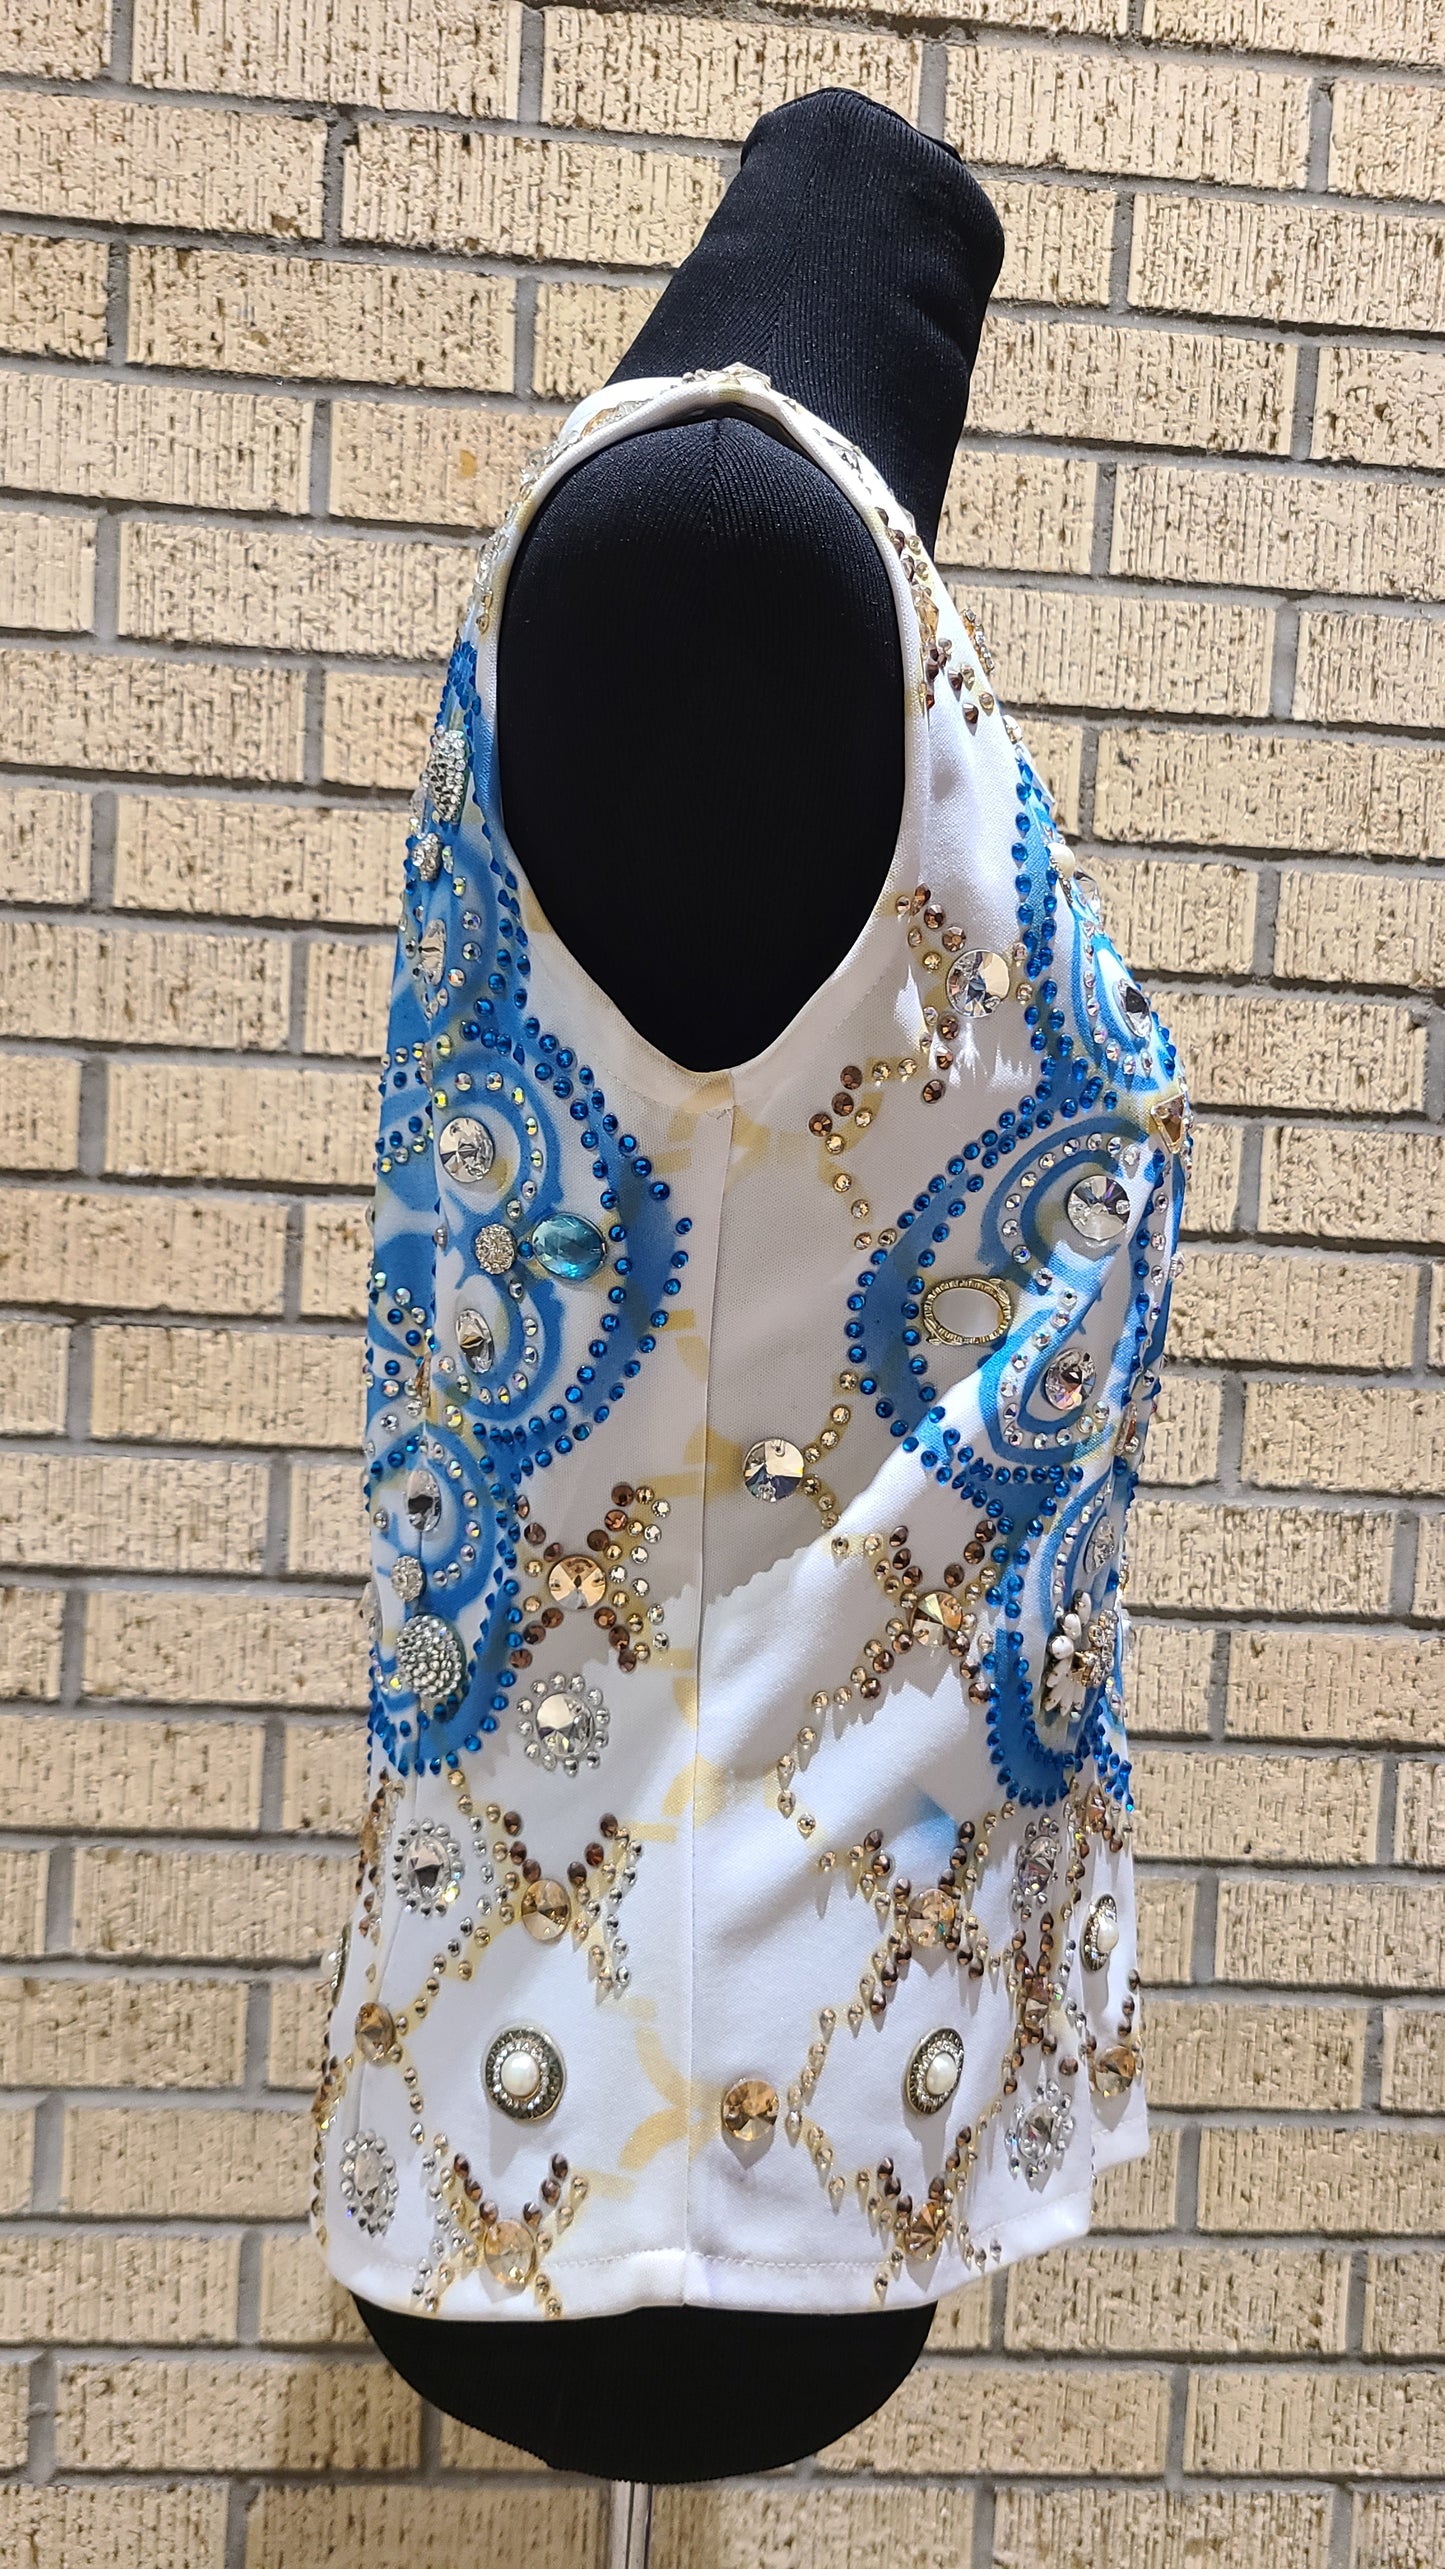 Size small white vest with blue and gold accents. Airbrushed design. STUNNING!